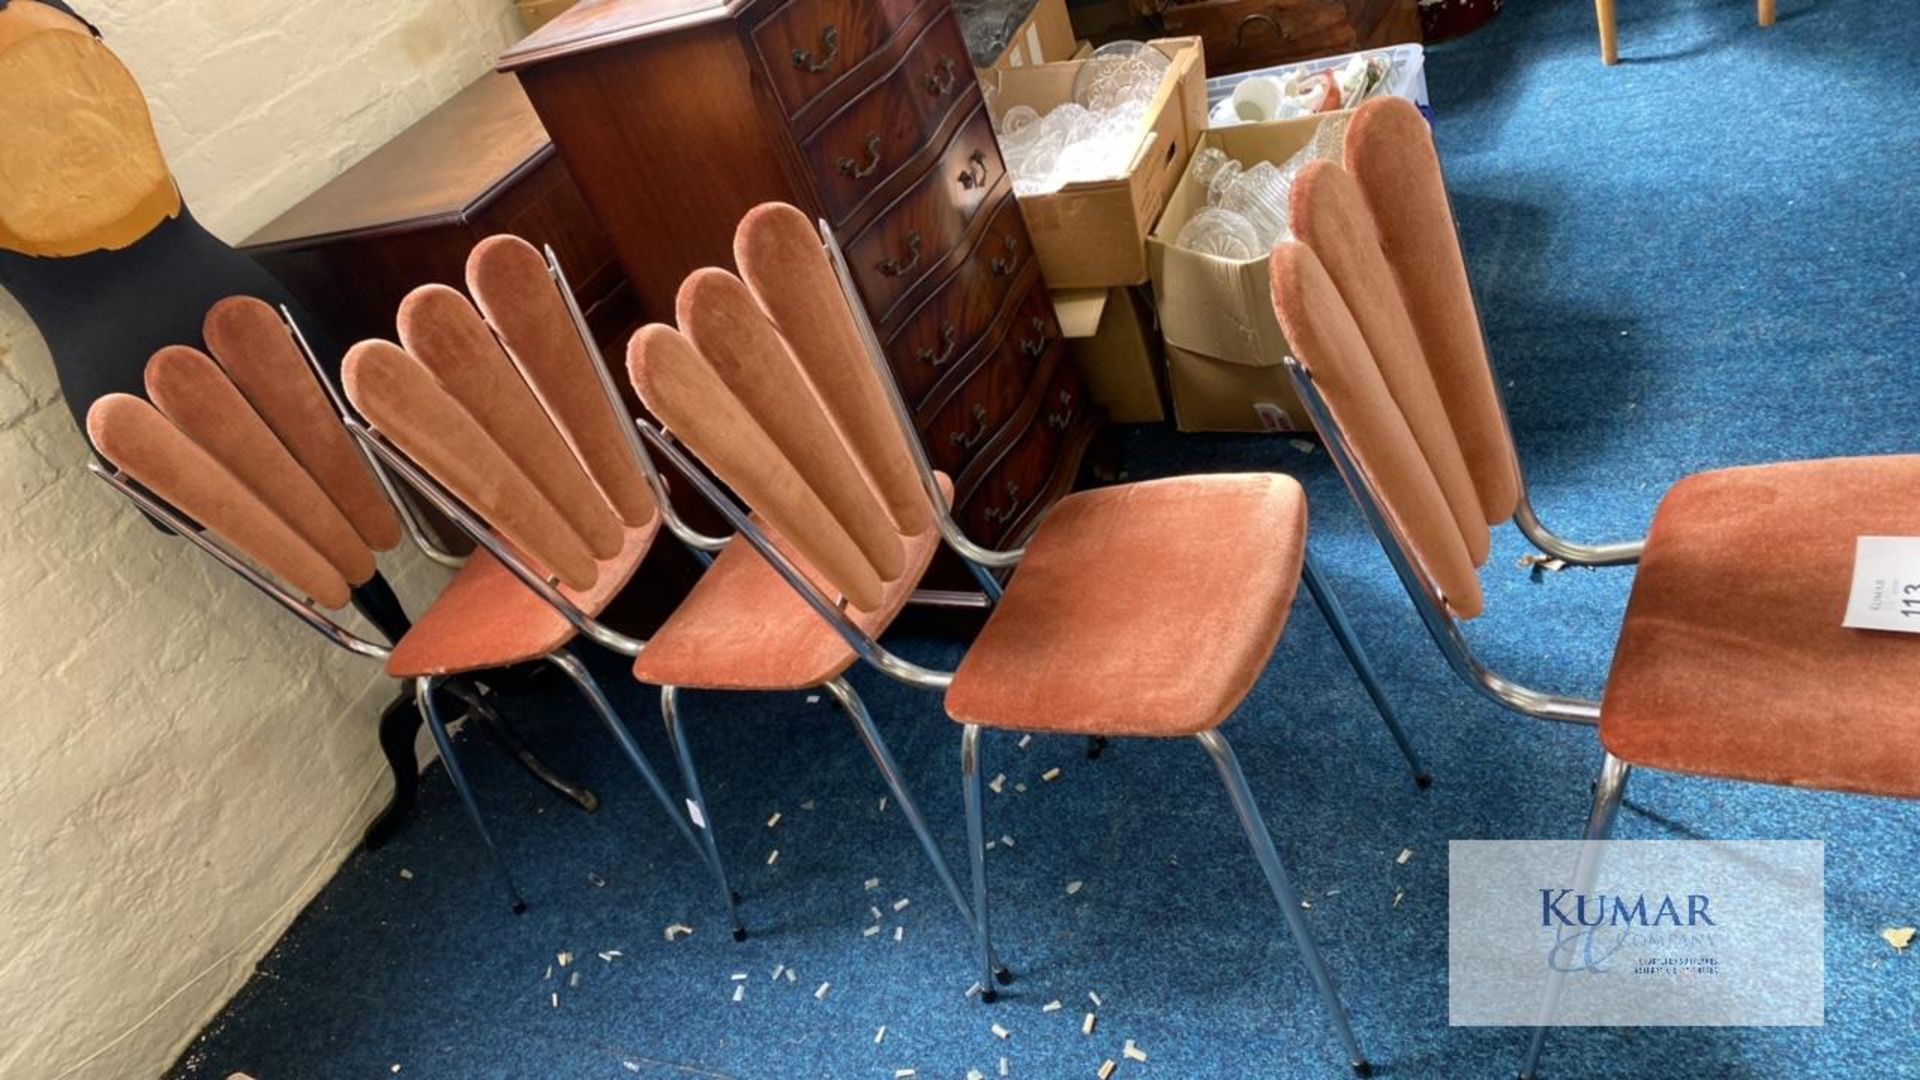 4 Retro Dining Chairs - Image 4 of 4